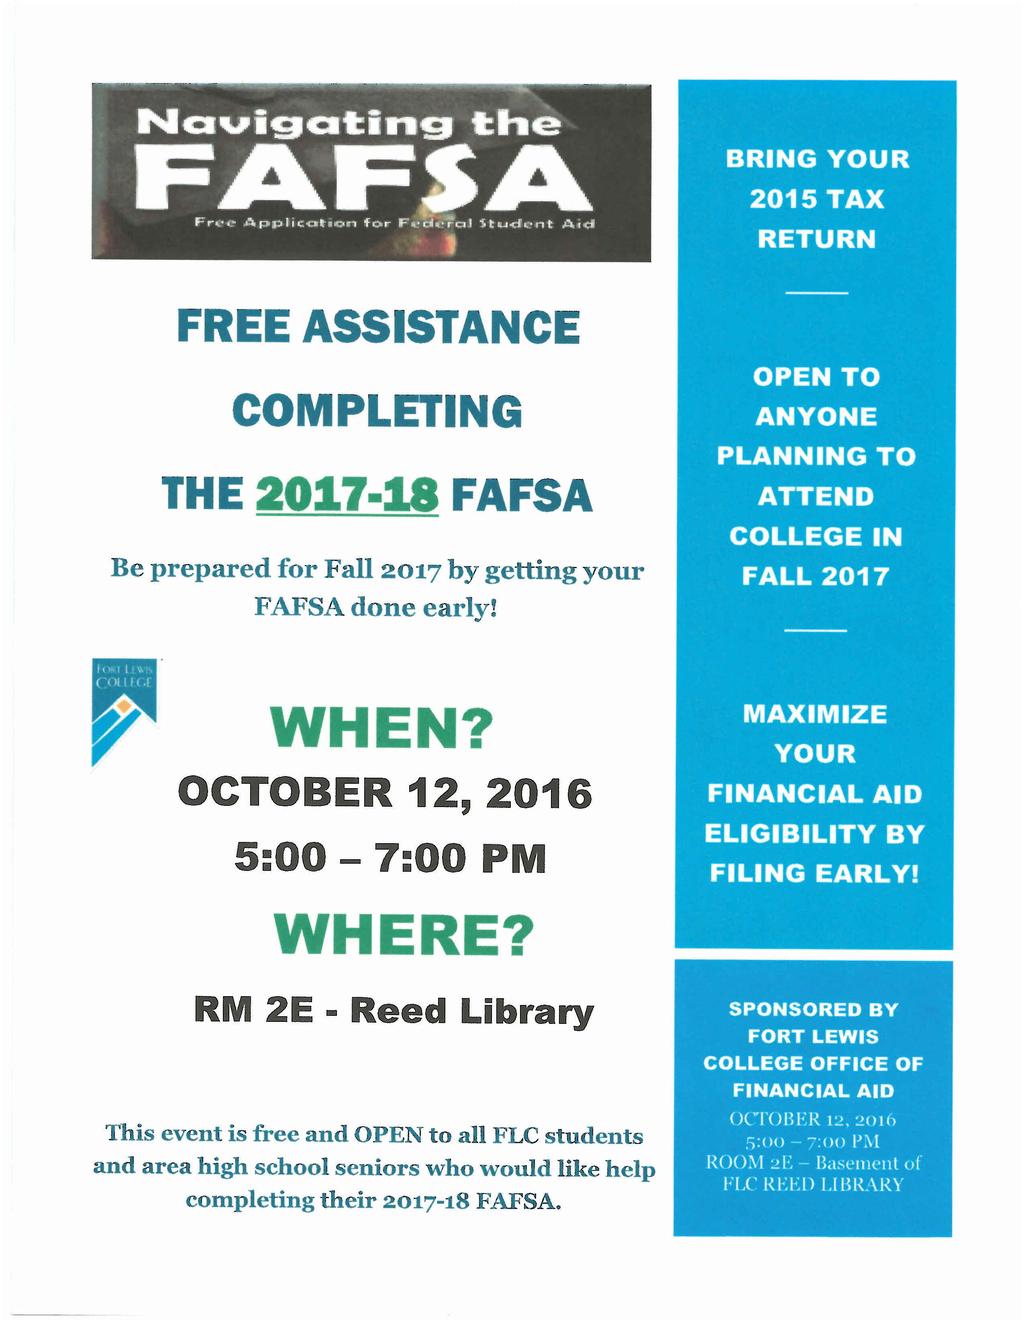 BRING YOUR 2015 TAX RETURN FREE ASSISTANCE COMPLETING THE 2017 18 FAFSA Be prepared for Fall 2017 by getting your FAFSAdone early! OPEN TO ANYONE PLANNING TO ATTEND COLLEGE IN FALL 2017 WHEN?